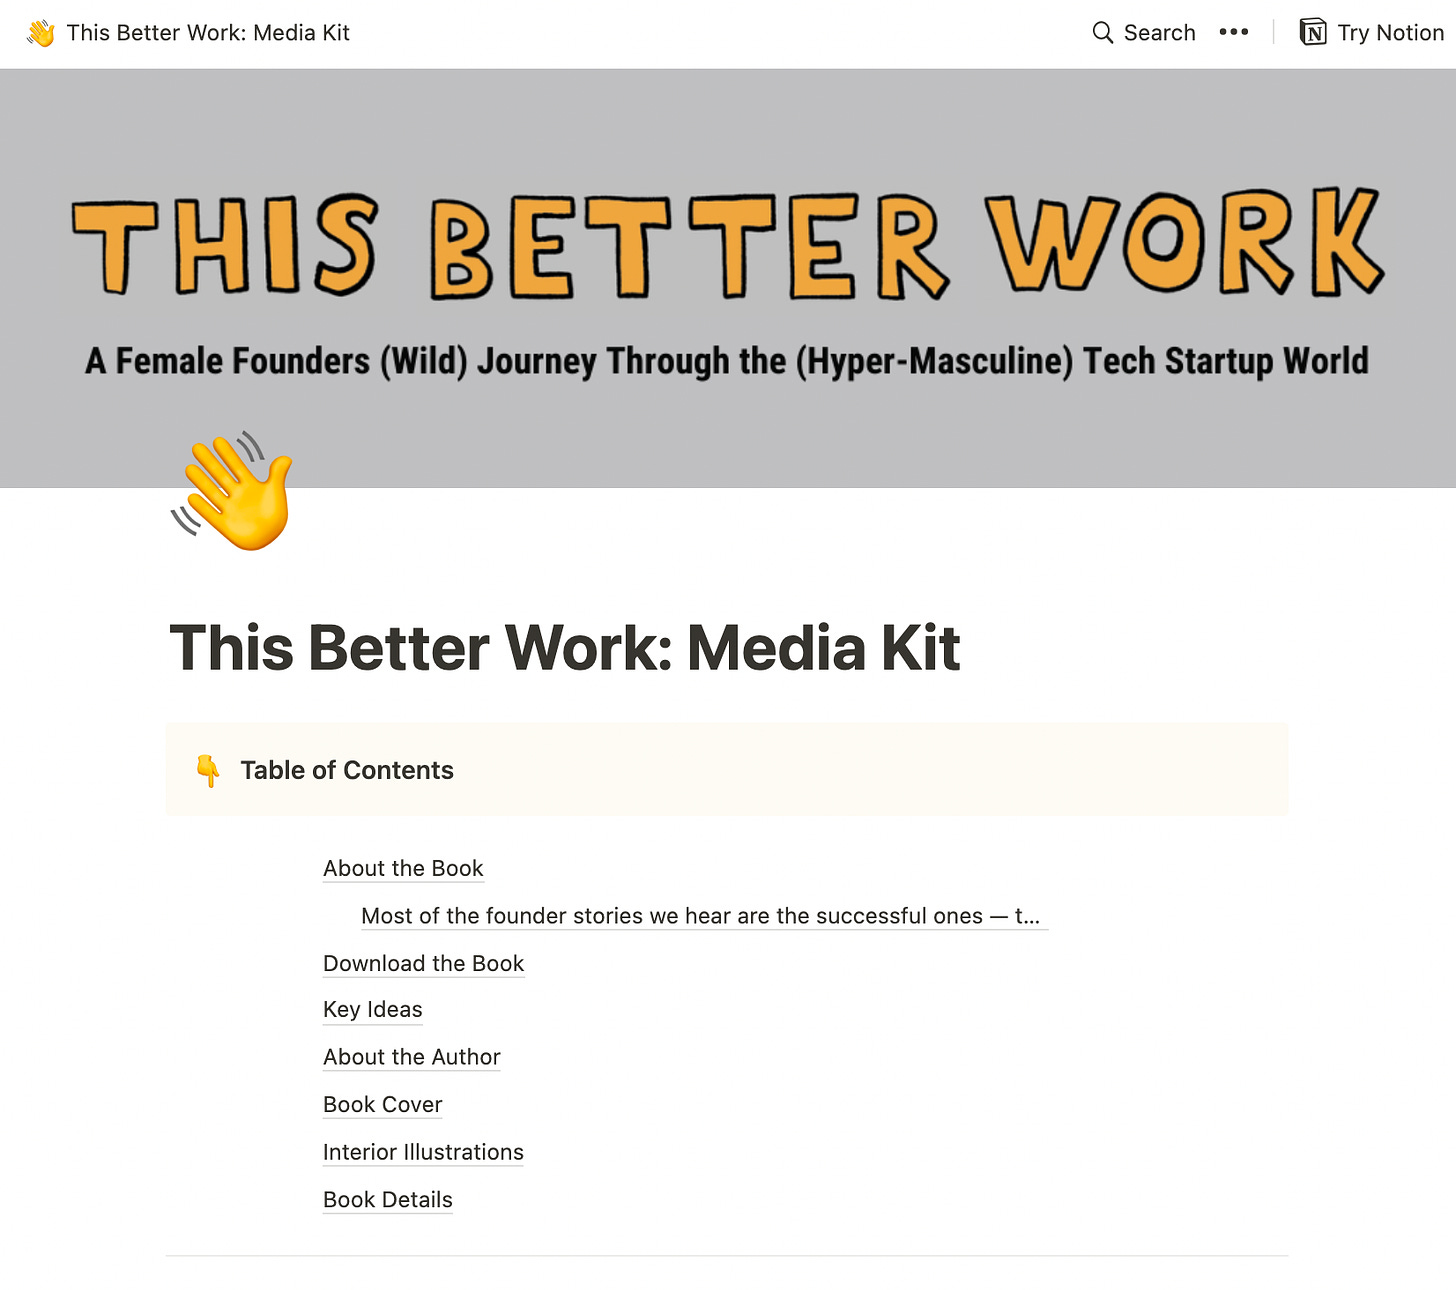 Building a Media Kit (in Notion)